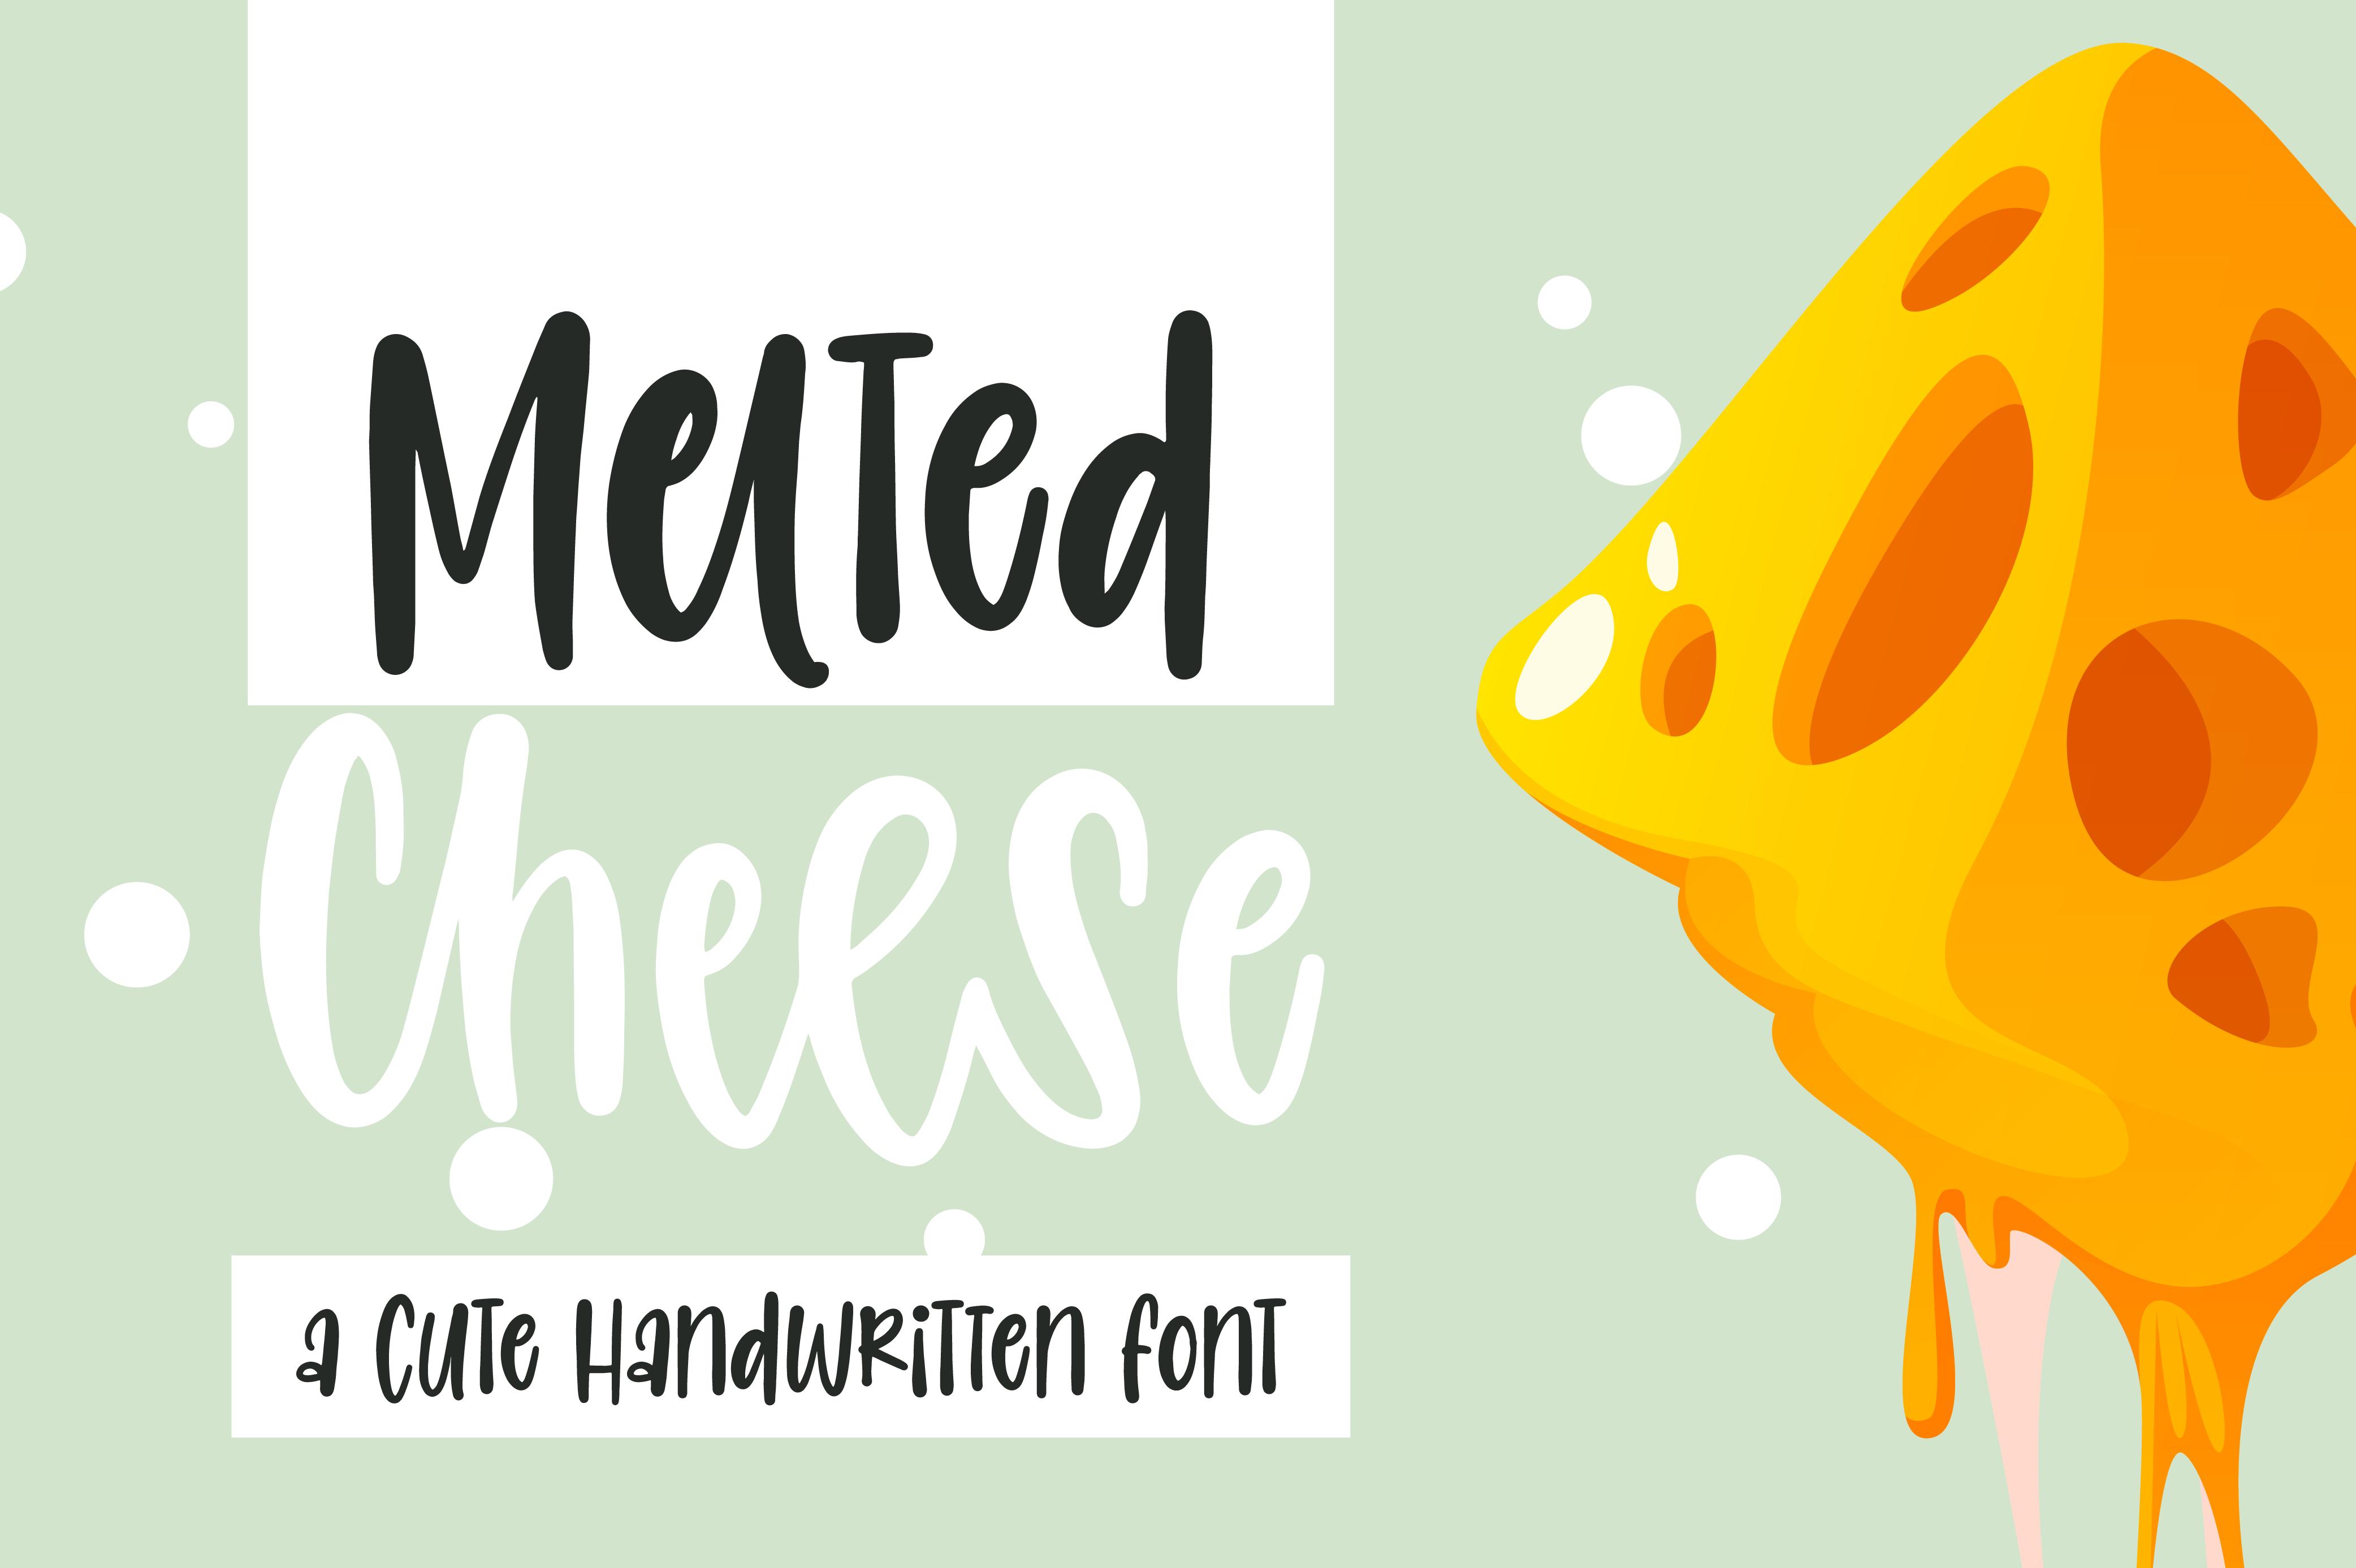 Melted Cheese Font